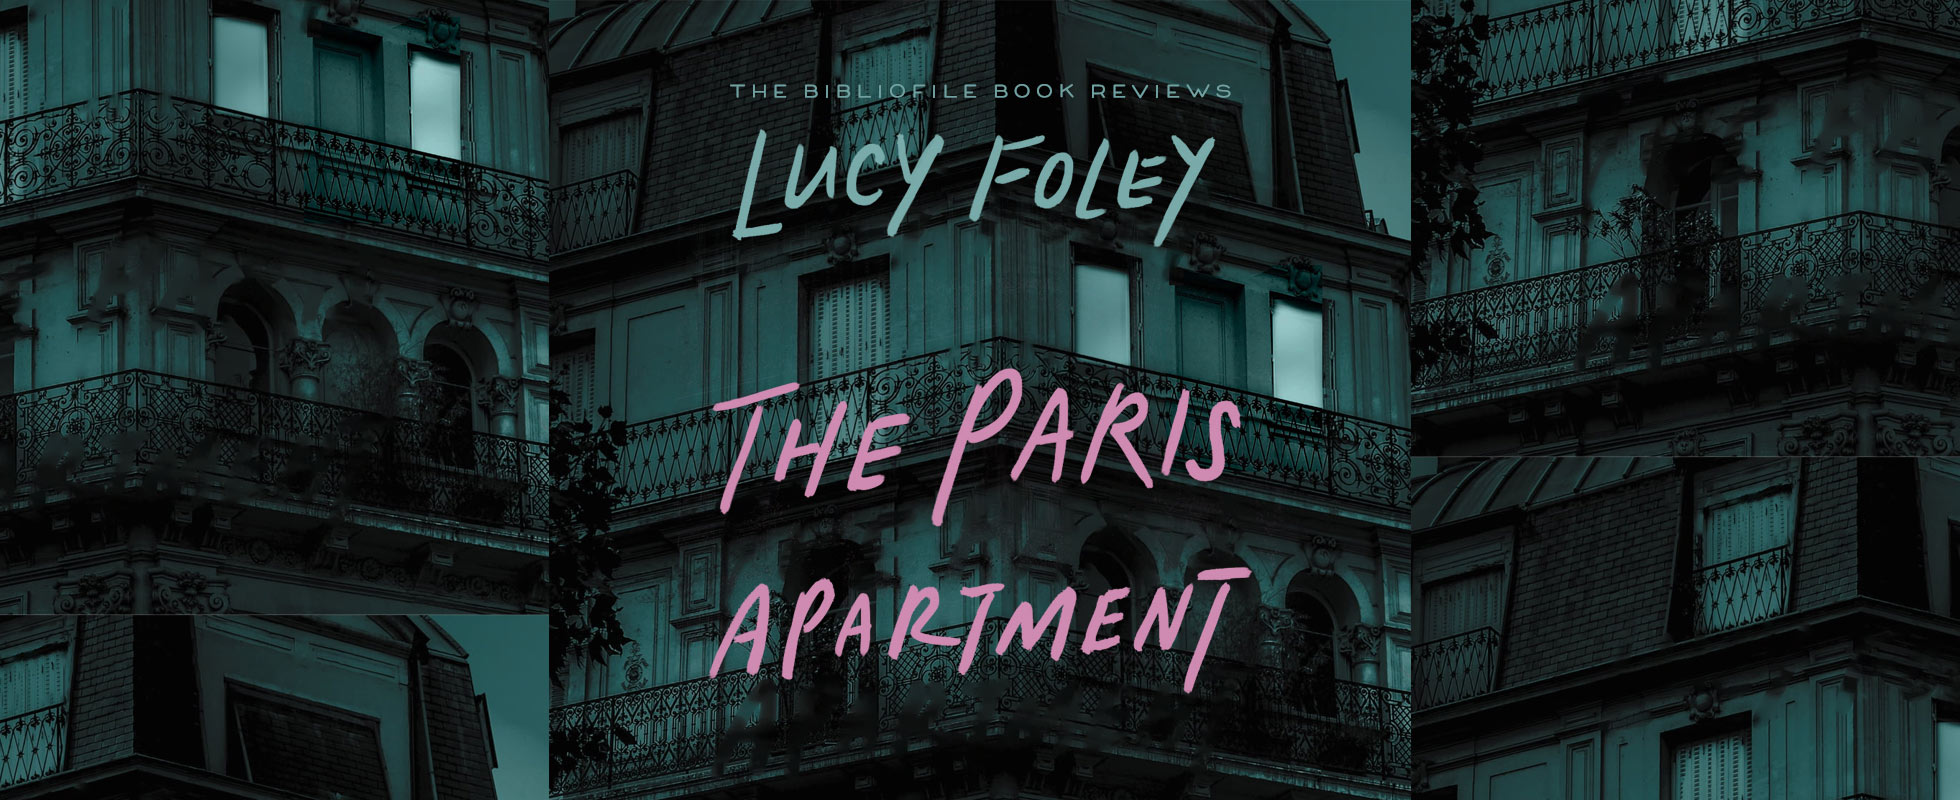 the paris apartment by lucy foley book review plot summary synopsis spoilers discussion